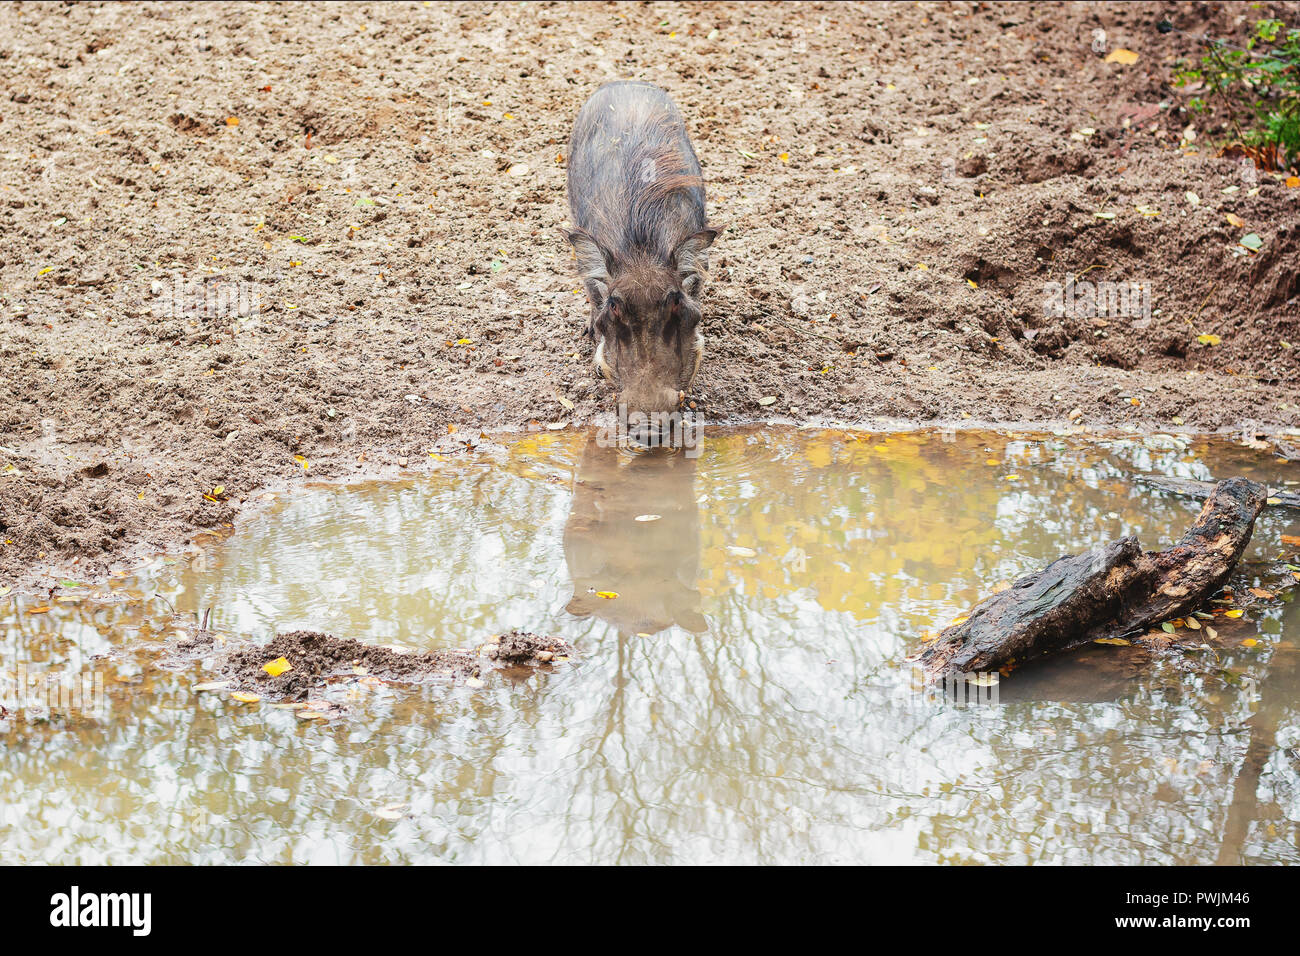 Common warthog drinking from a puddle in Burgers' Zoo in The Netherlands Stock Photo